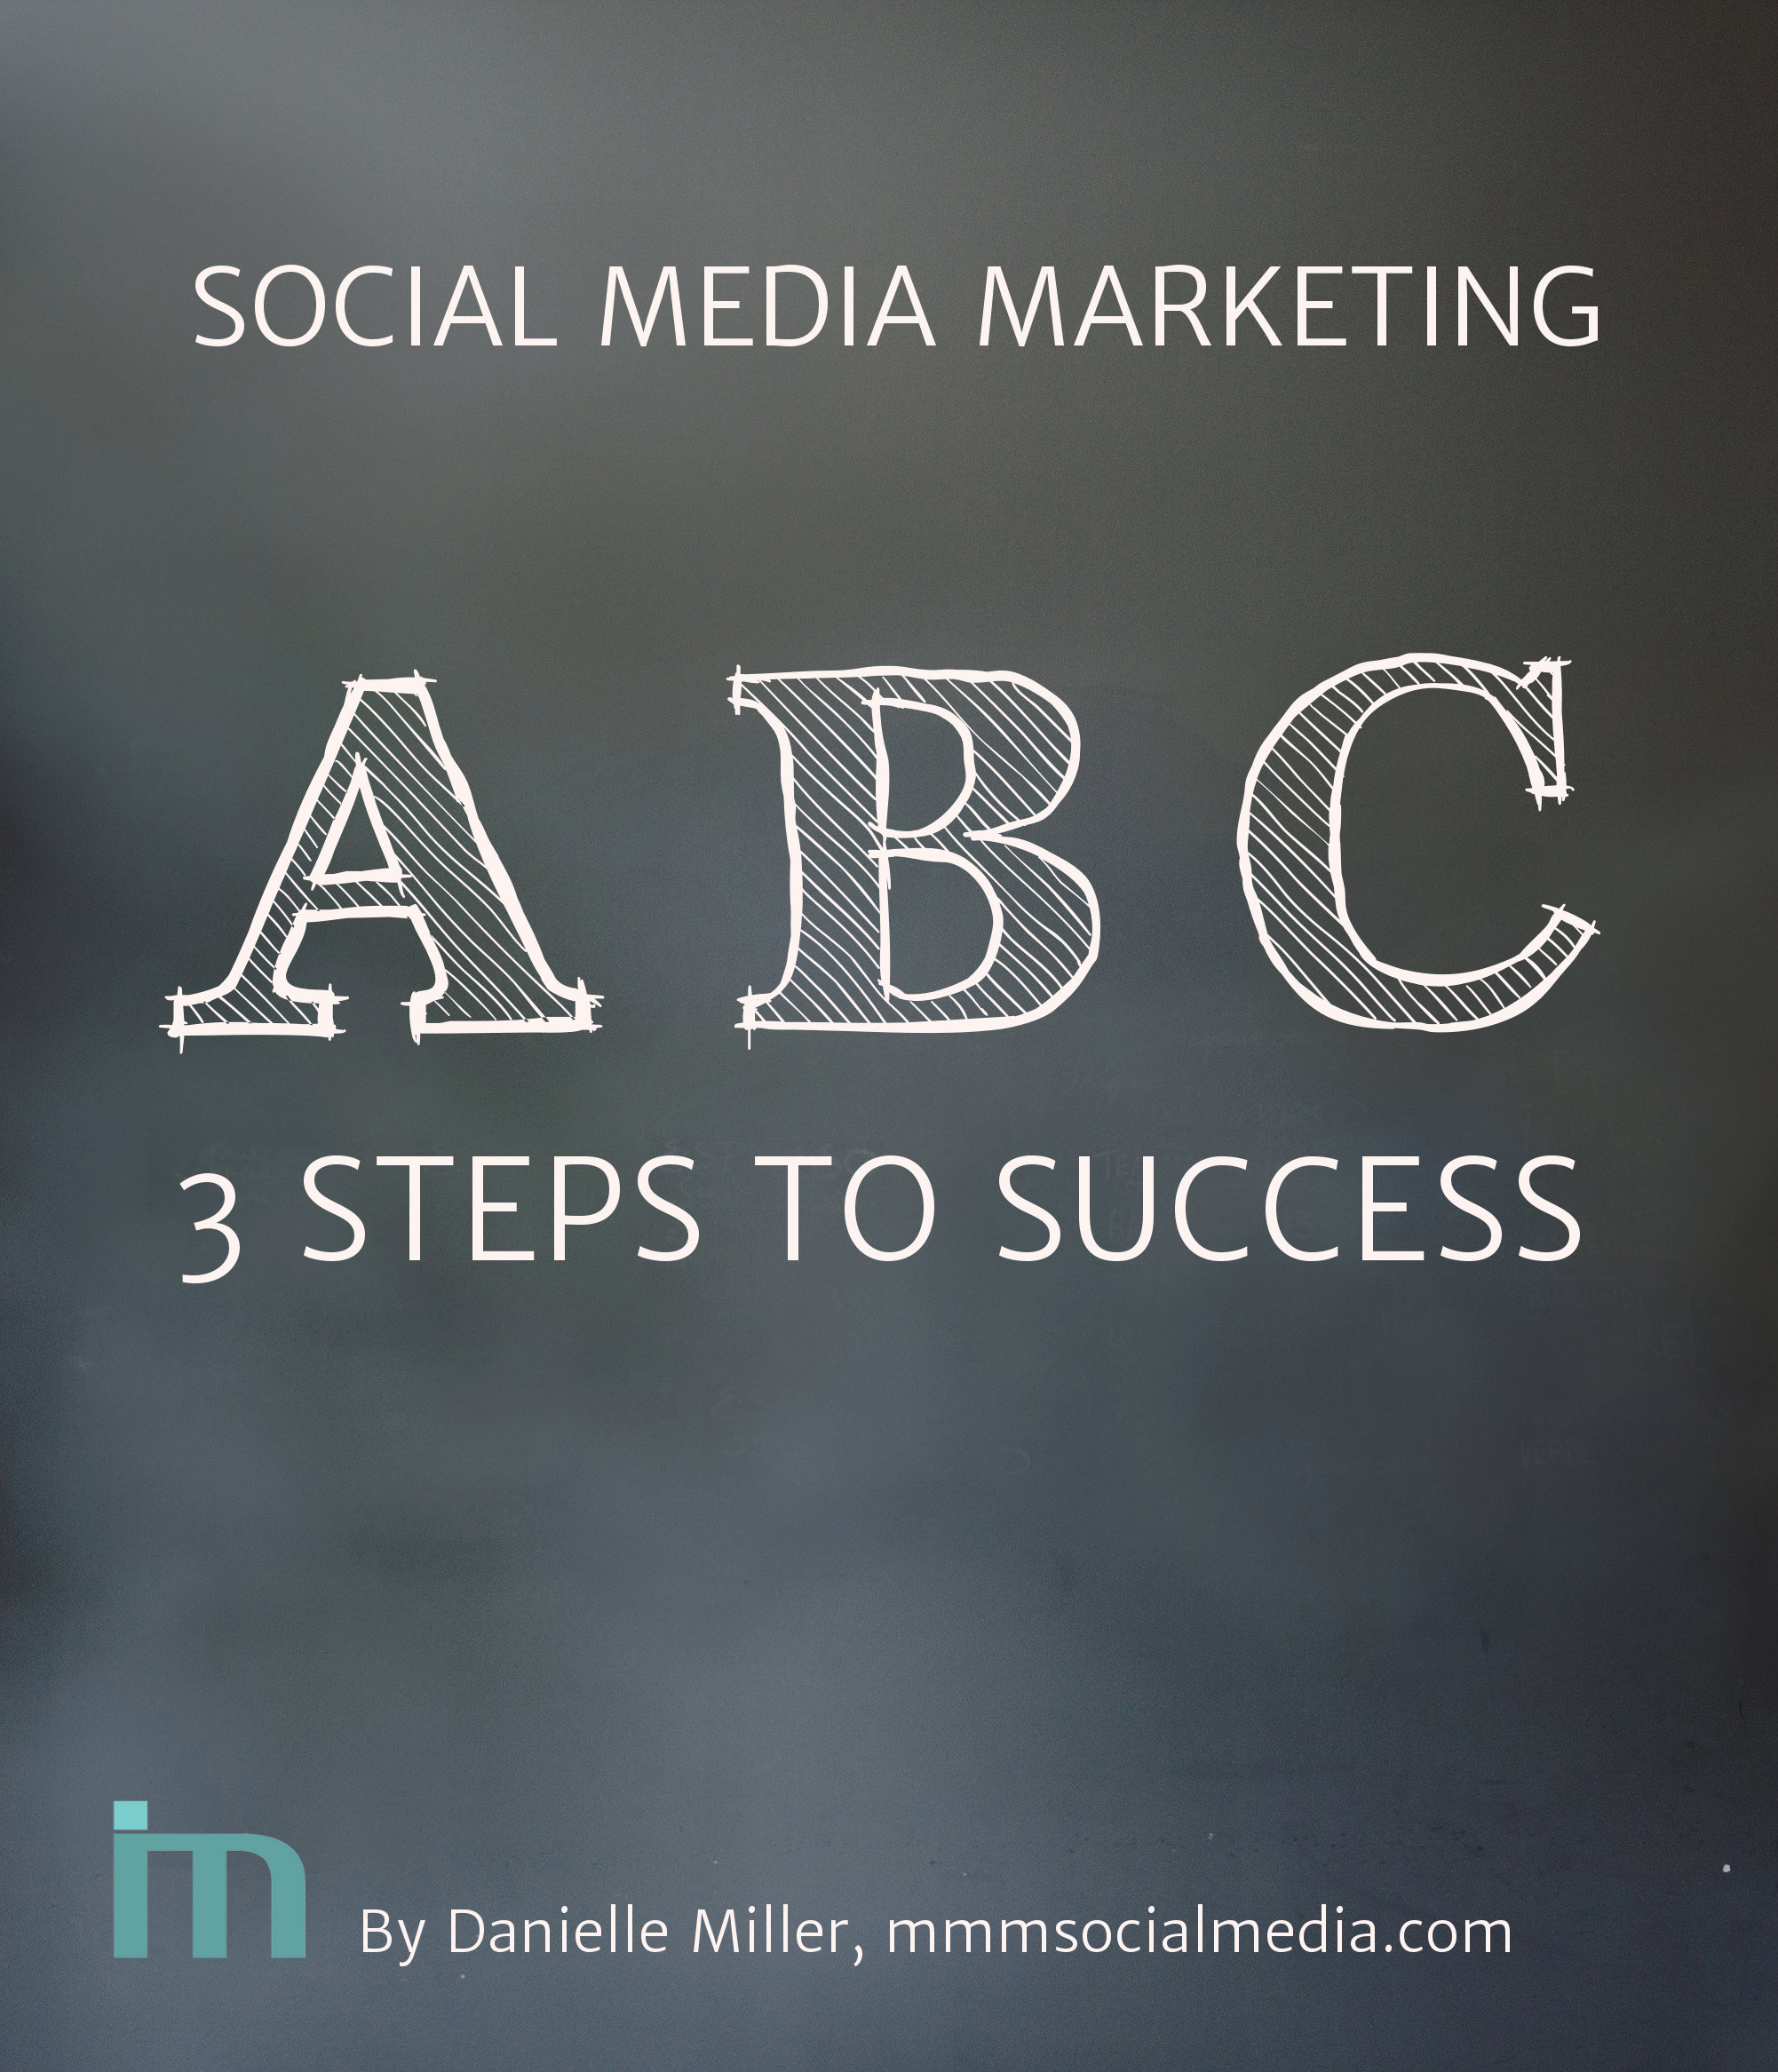 Part III: The 3-step process that makes Social Media Marketing as easy as ABC